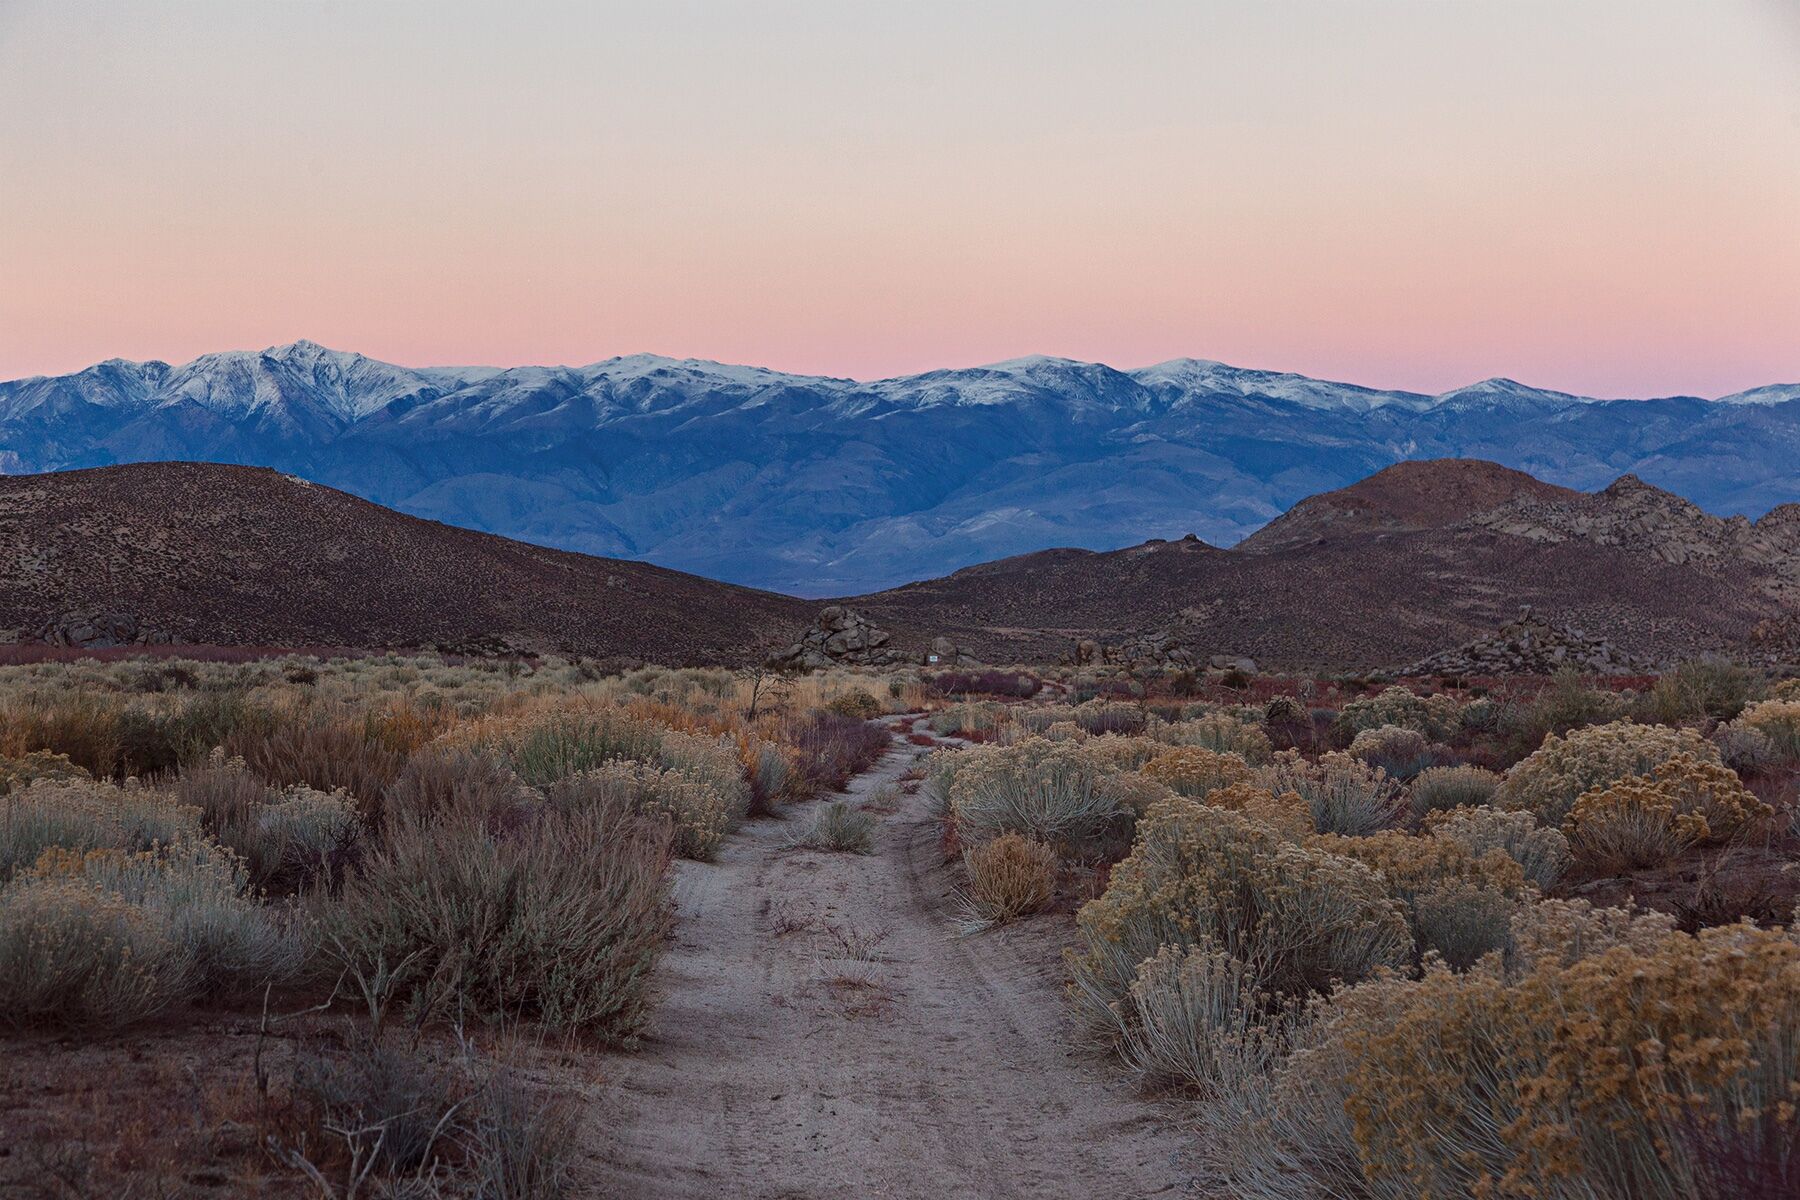 A sunset over the Sierras in the Buttermilks in California